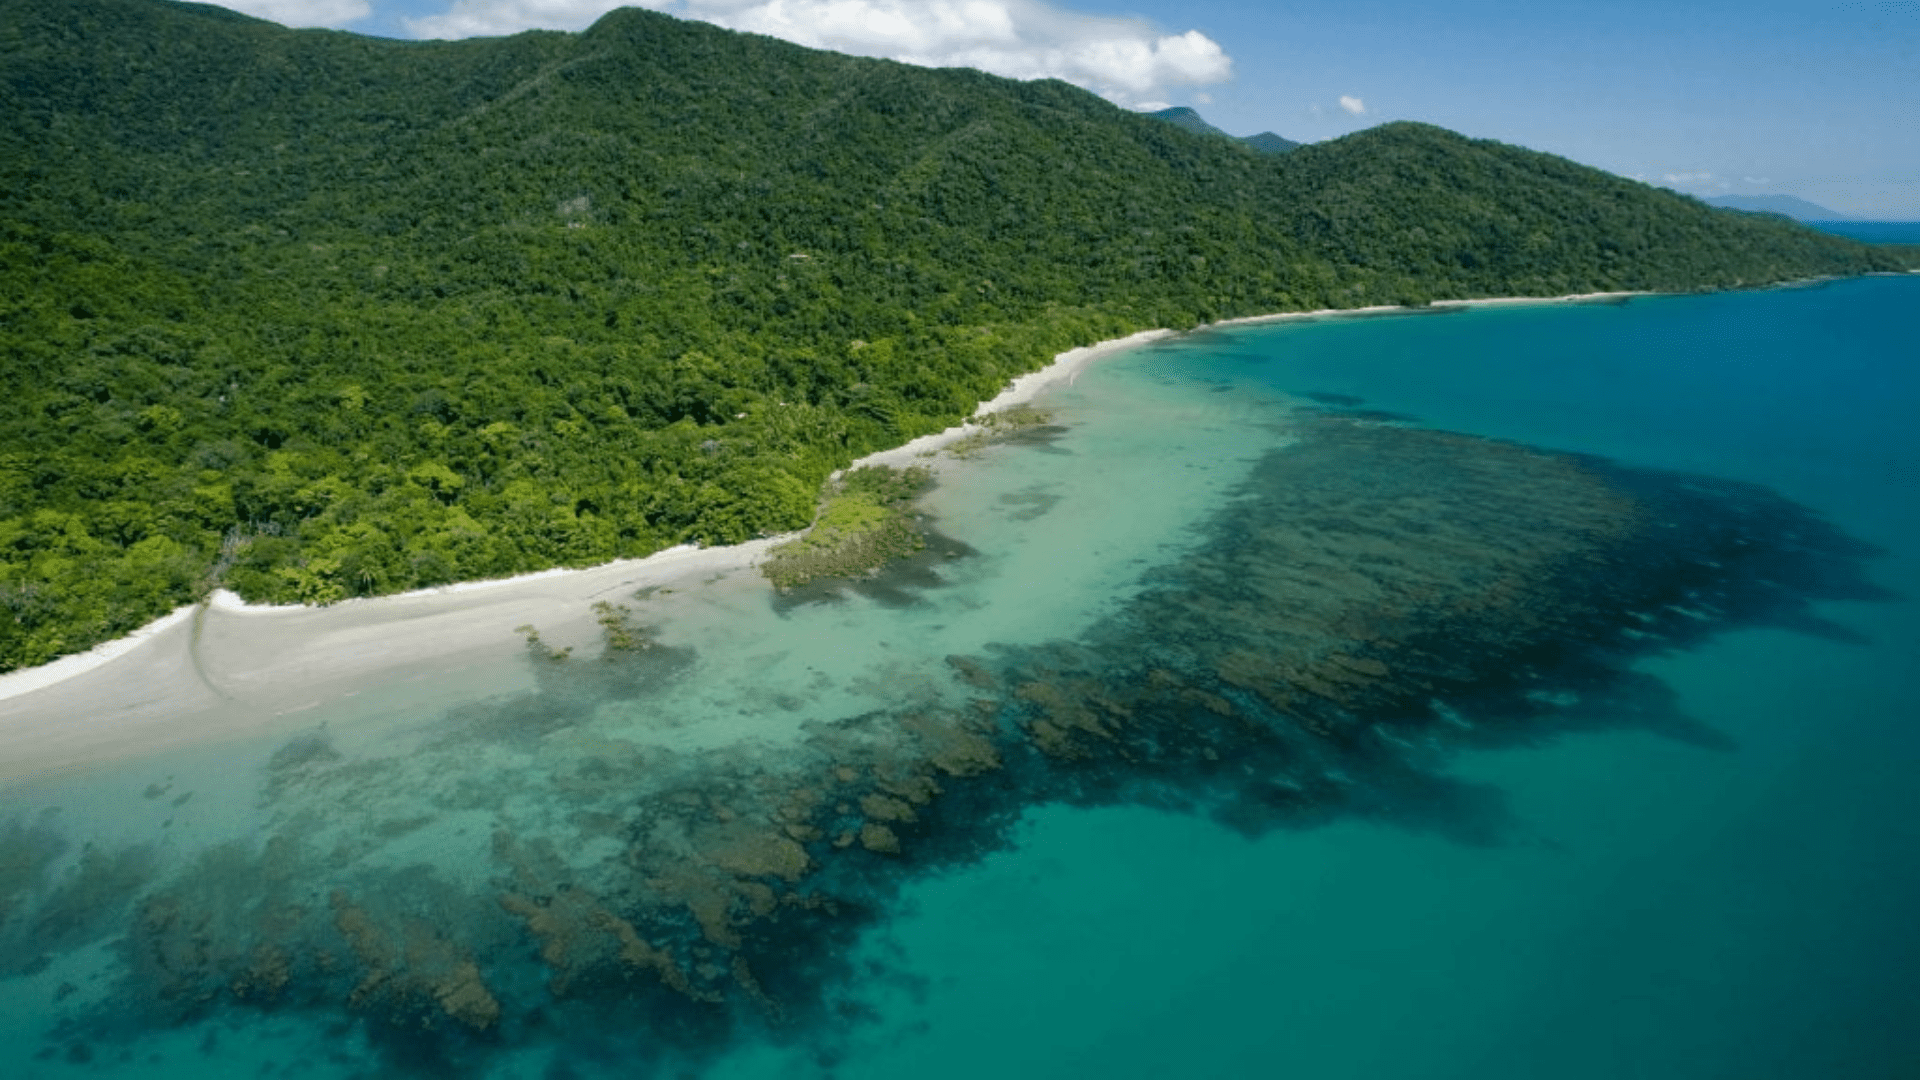 Daintree Rainforest connects with Great Barrier Reef